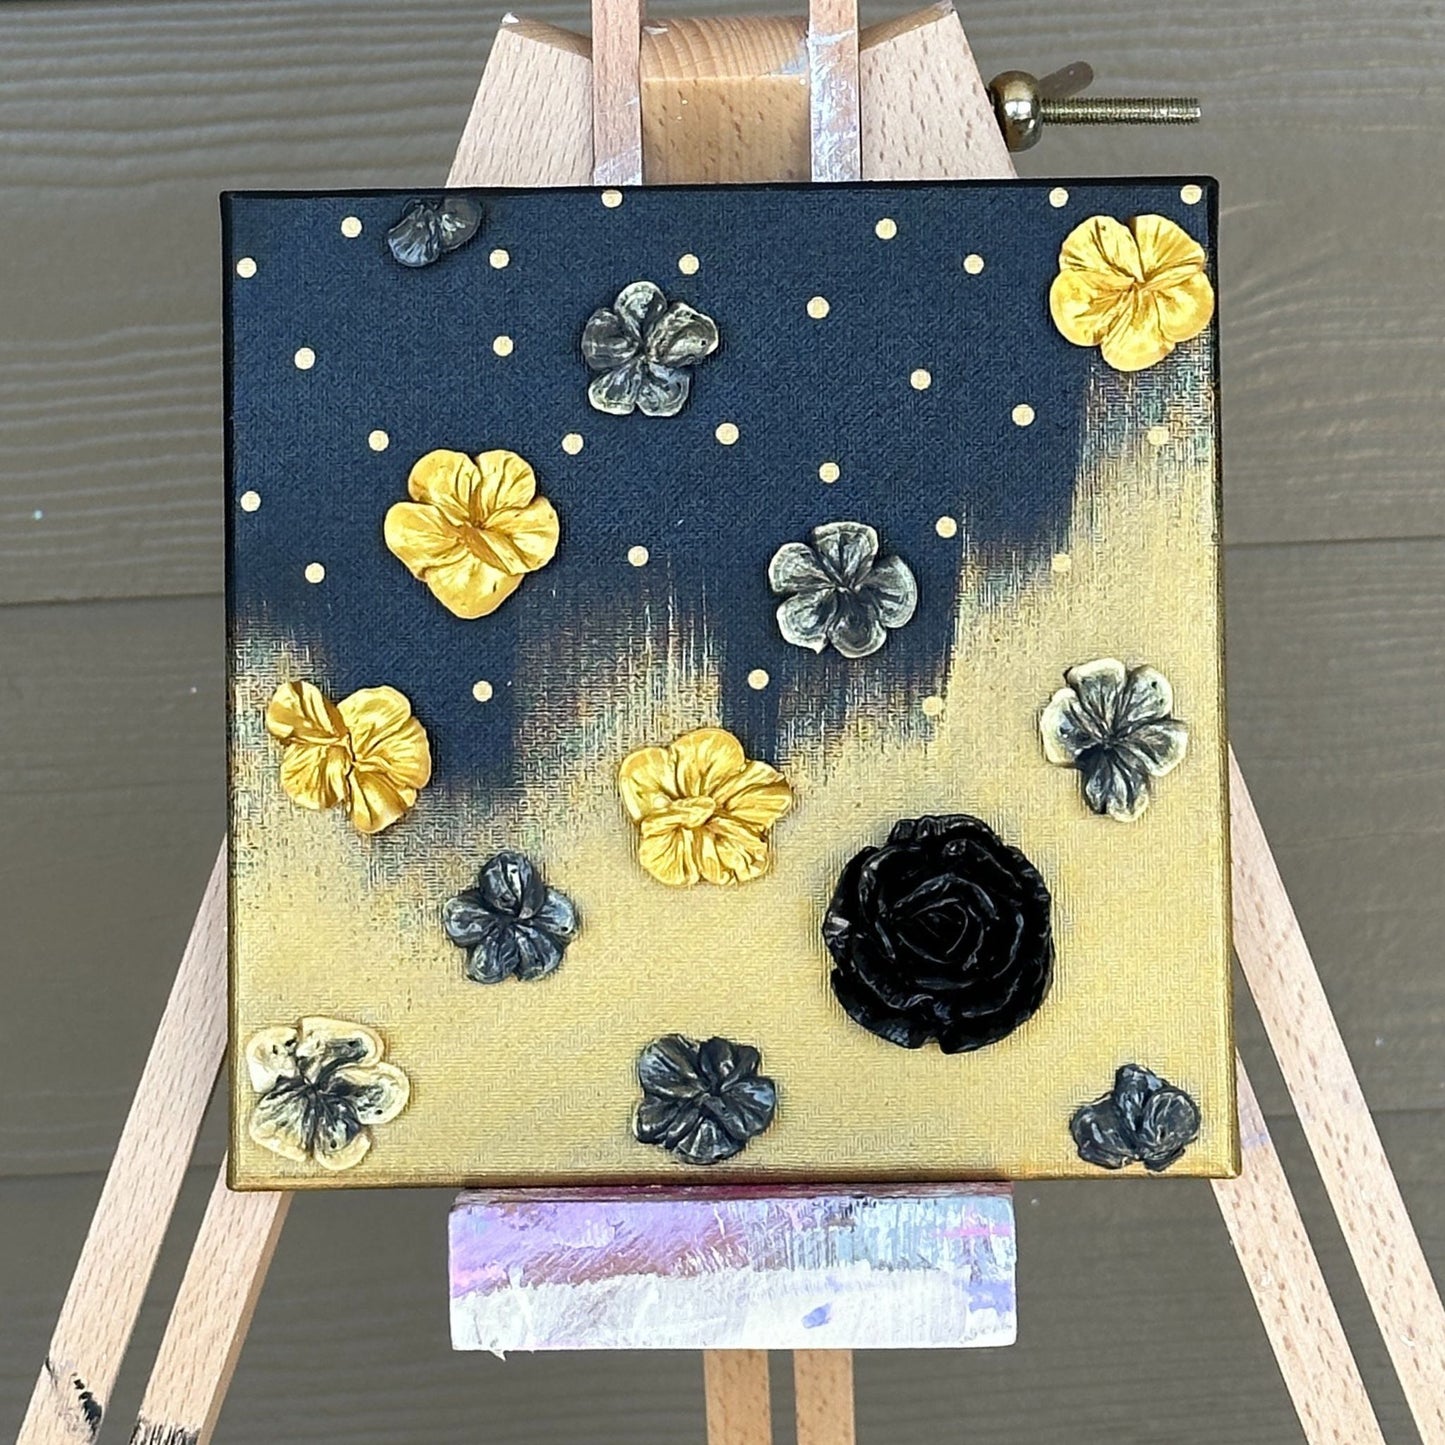 3D Gold and Black Flowers on Gold and Black background 8"x8"